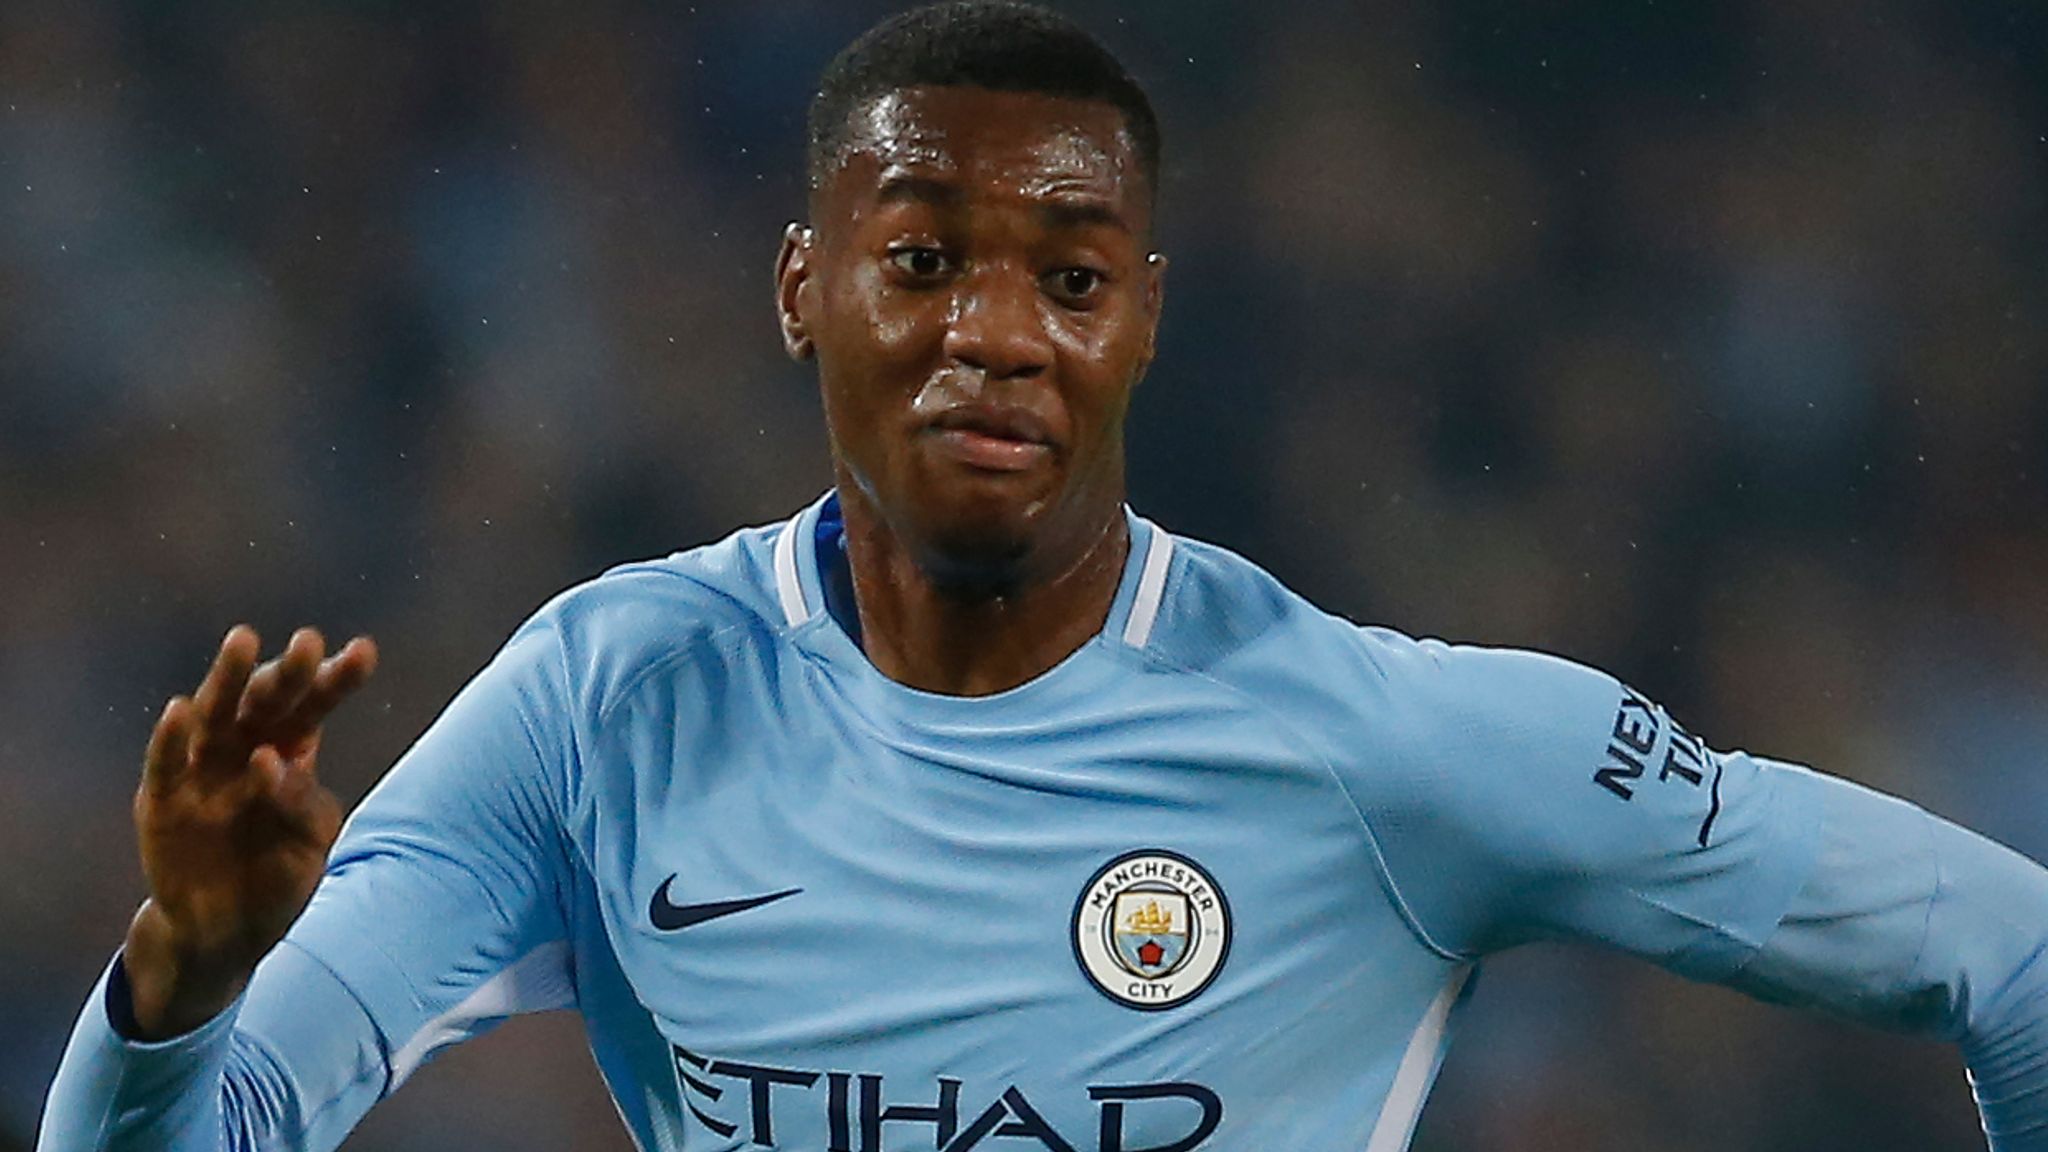  Tosin Adarabioyo, a young English professional footballer who plays for Premier League club Fulham, on loan from Manchester City, as a centre back.